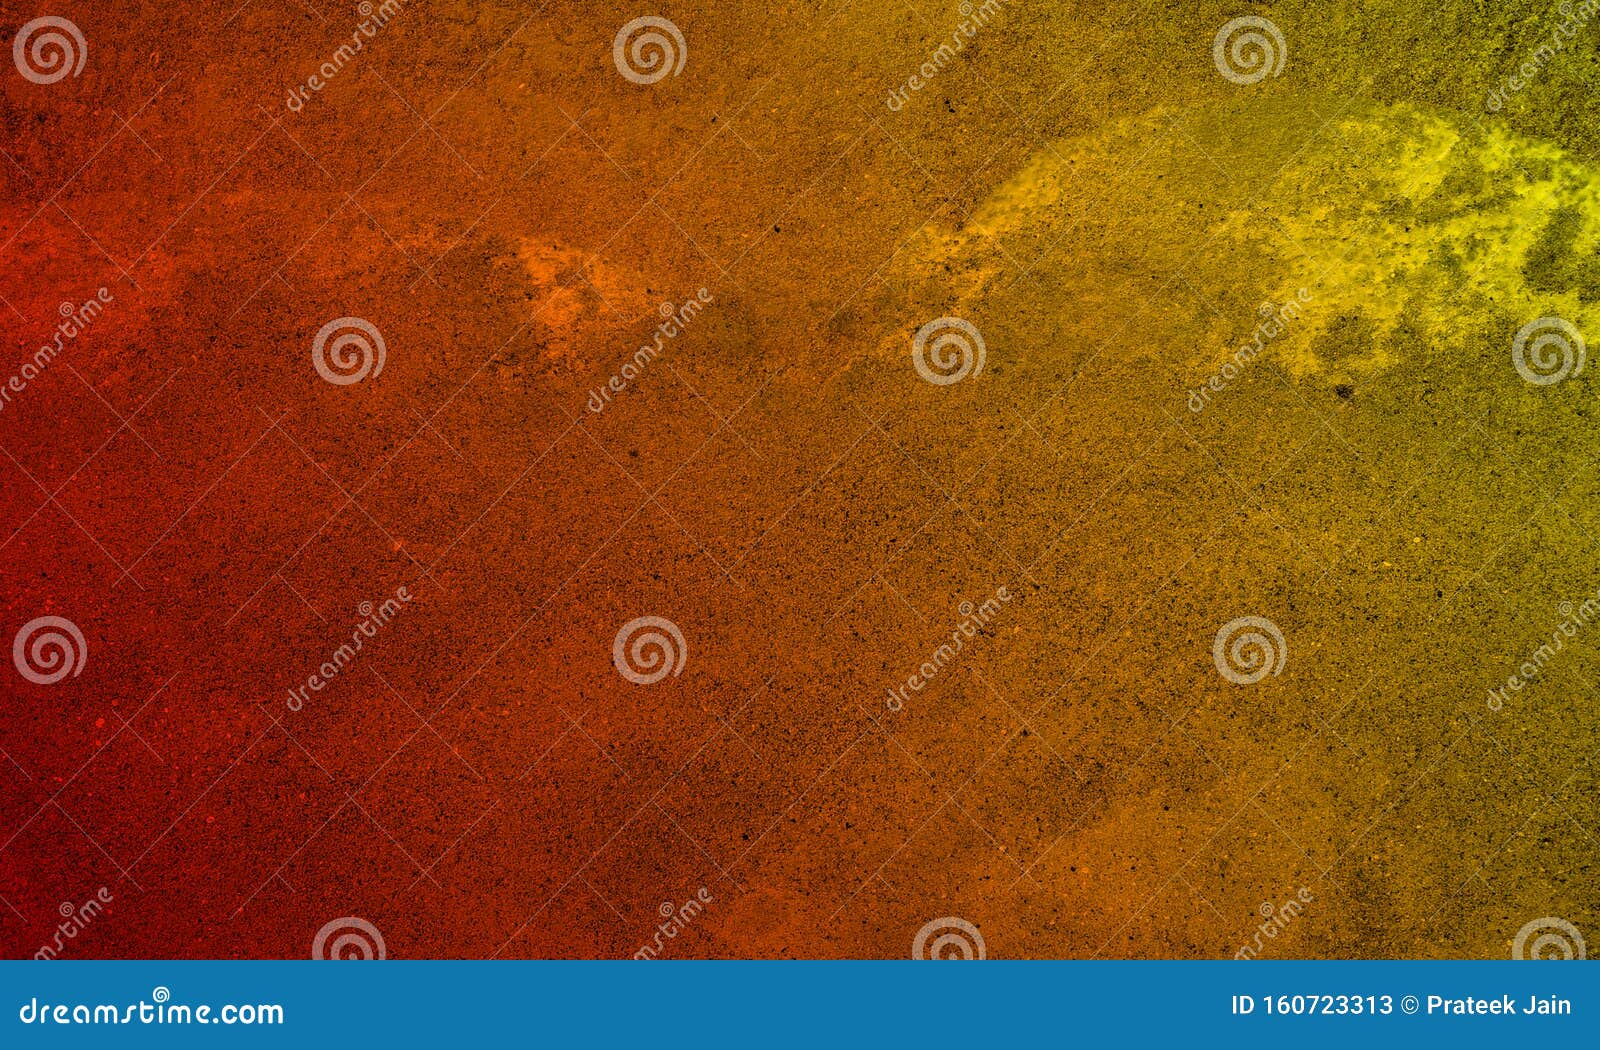 Texture  Abstract Grunge Rusty Distorted Decay Old Texture Background  Wallpaper. Stock Image - Image of soil, abstract: 160723313